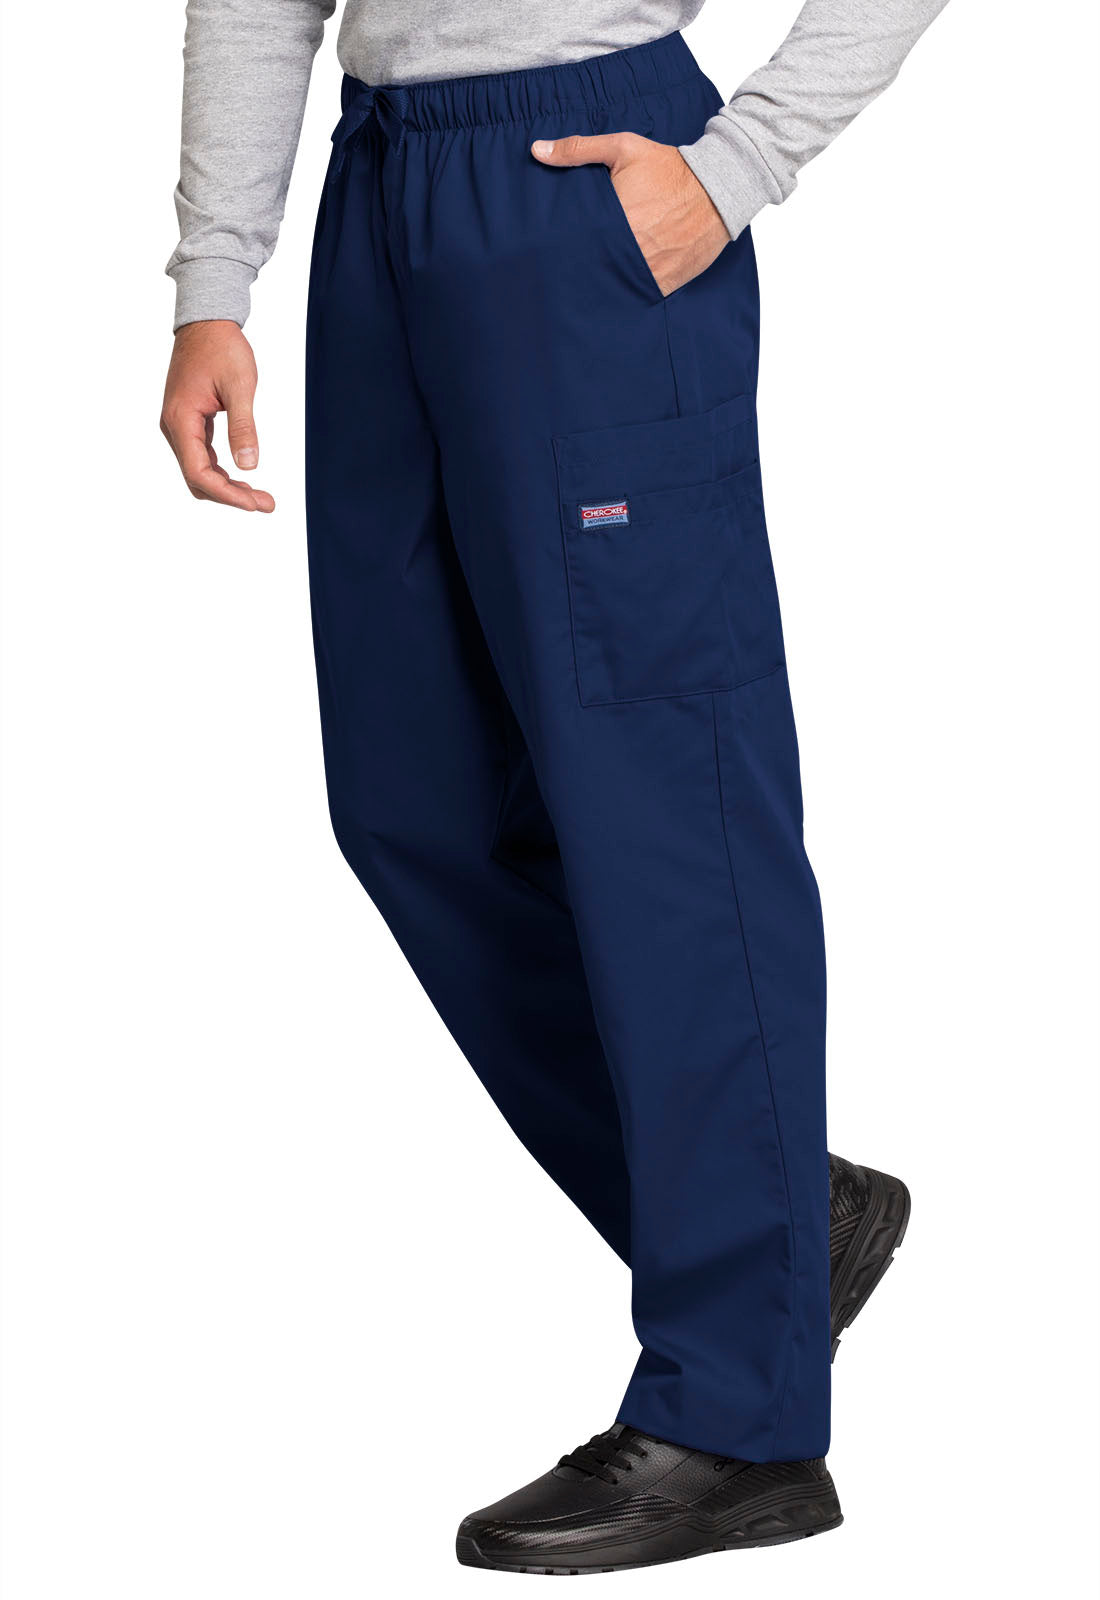 Men's Fly Front Cargo  Pant